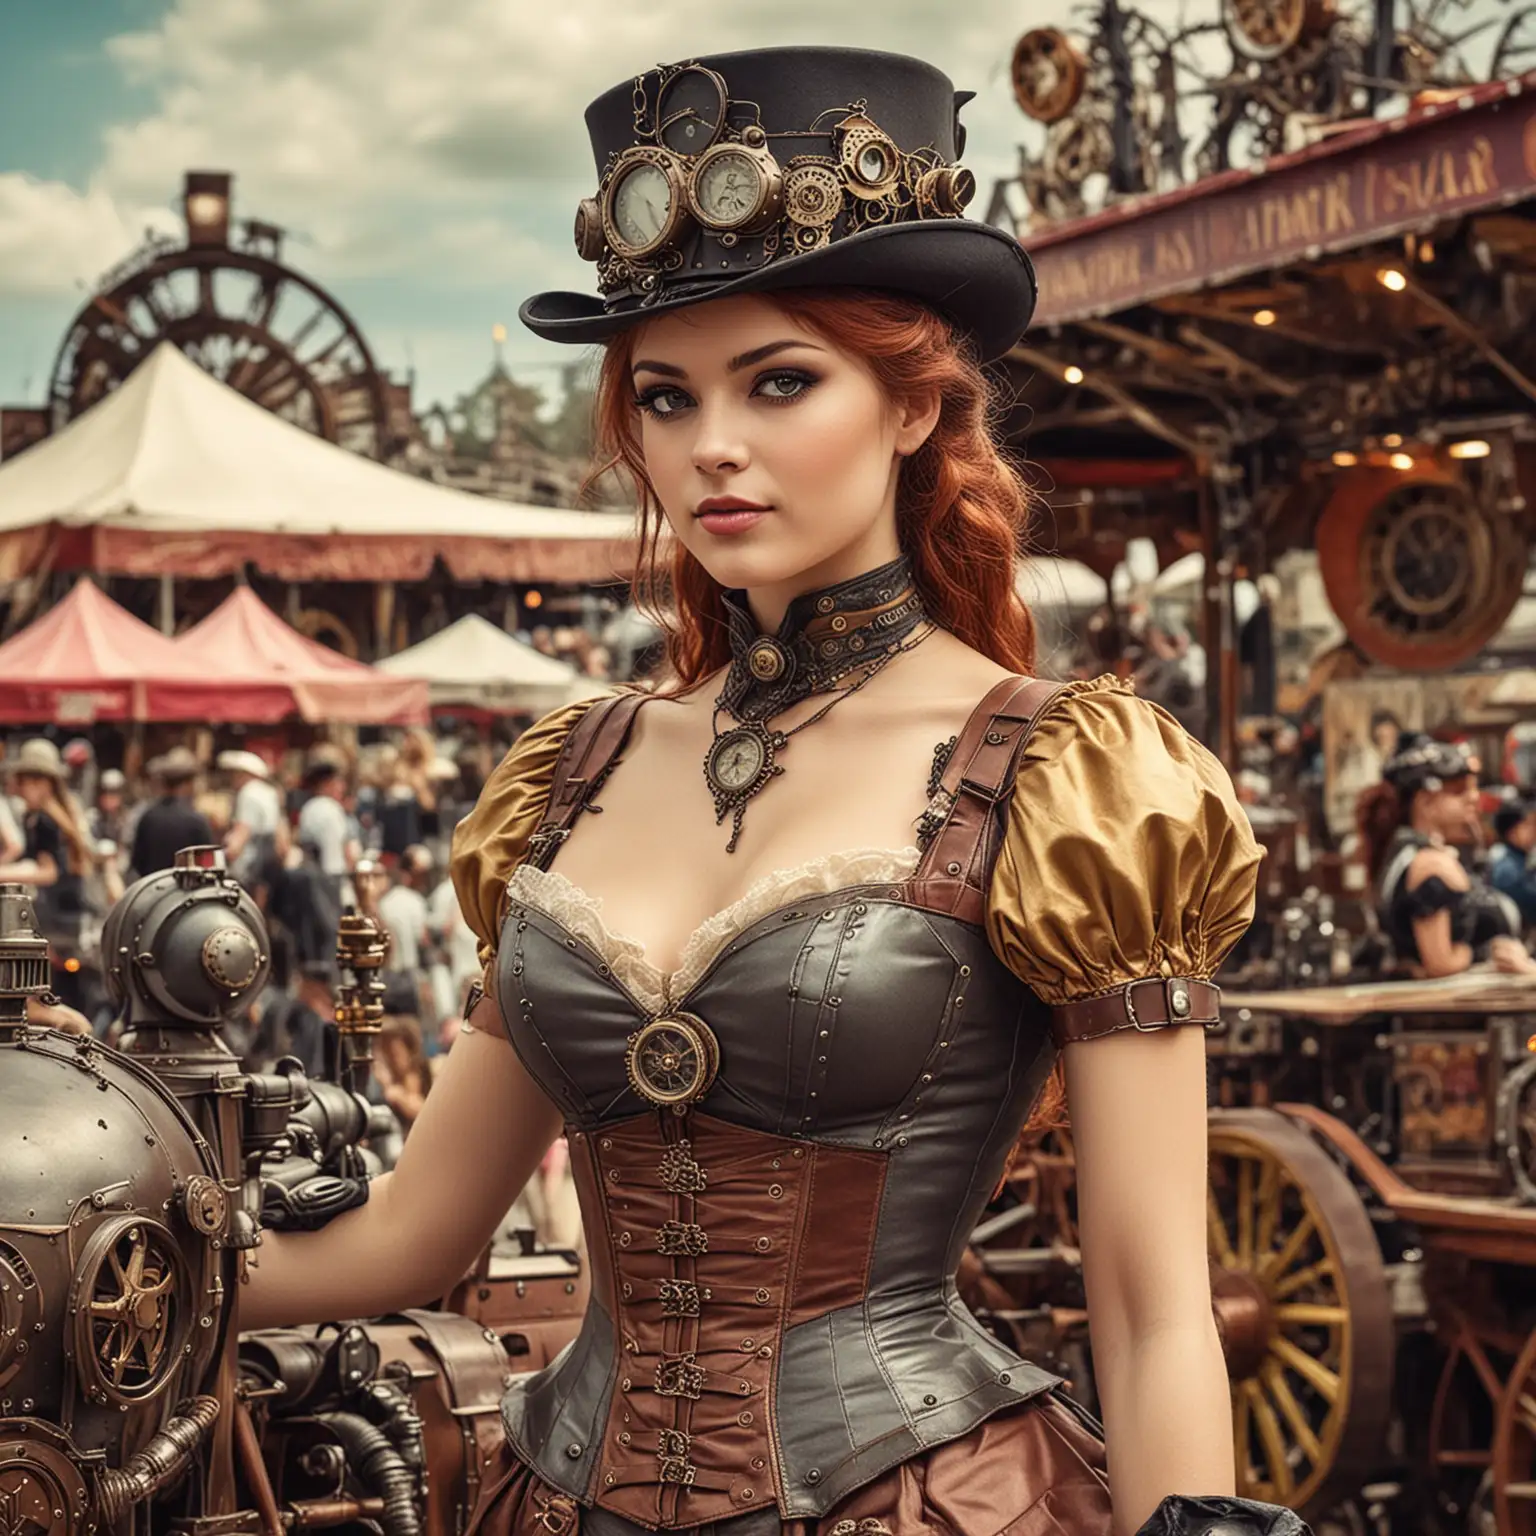 Beautiful colored postcard with a steampunk super model at a fair.